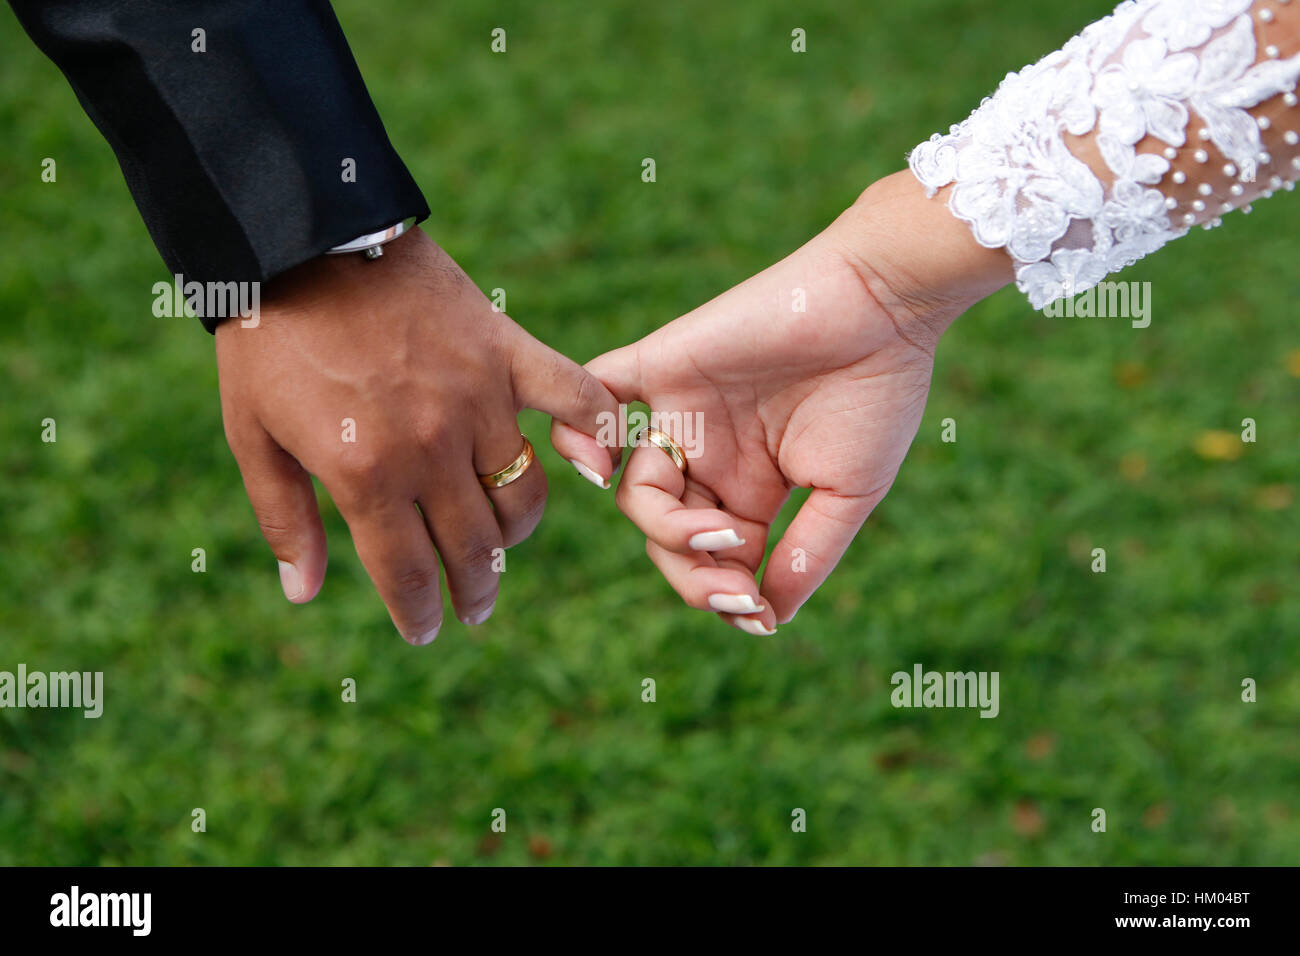 Married hands with fingers showing wedding rings Stock Photo